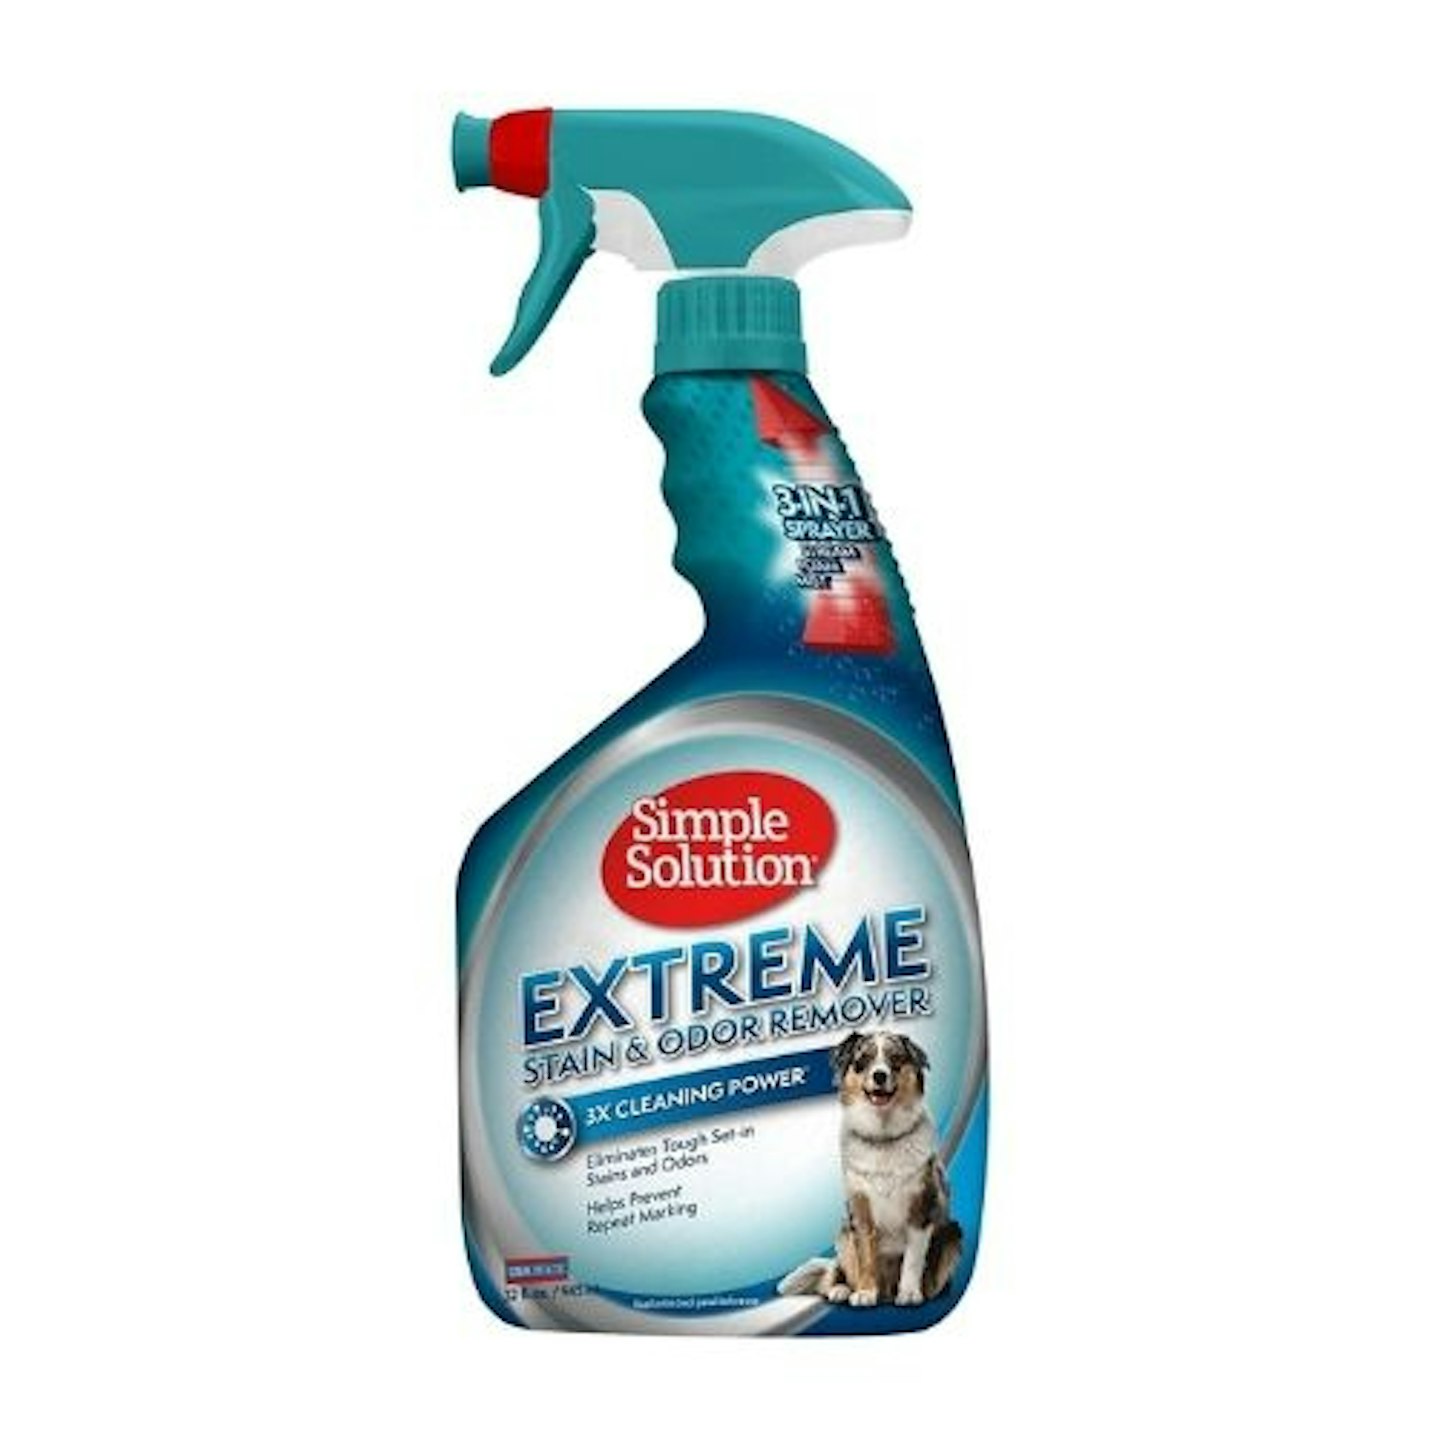  Simple Solution Extreme Pet Stain and Odour Remover